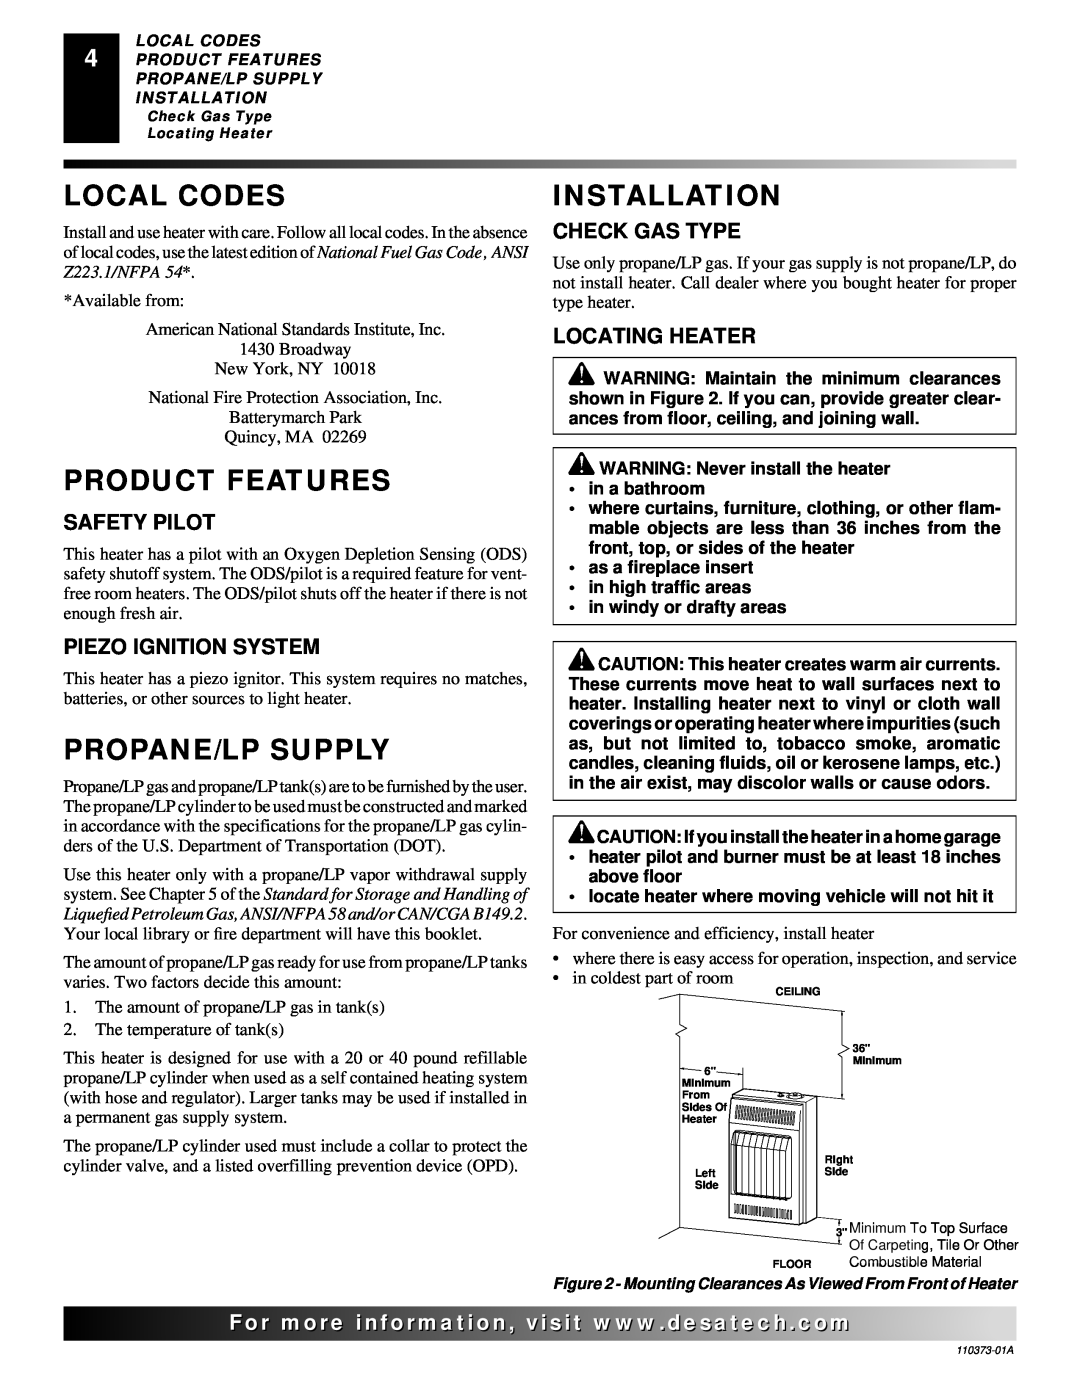 Desa REM10PT installation manual Local Codes, Product Features, Propane/Lp Supply, Installation 